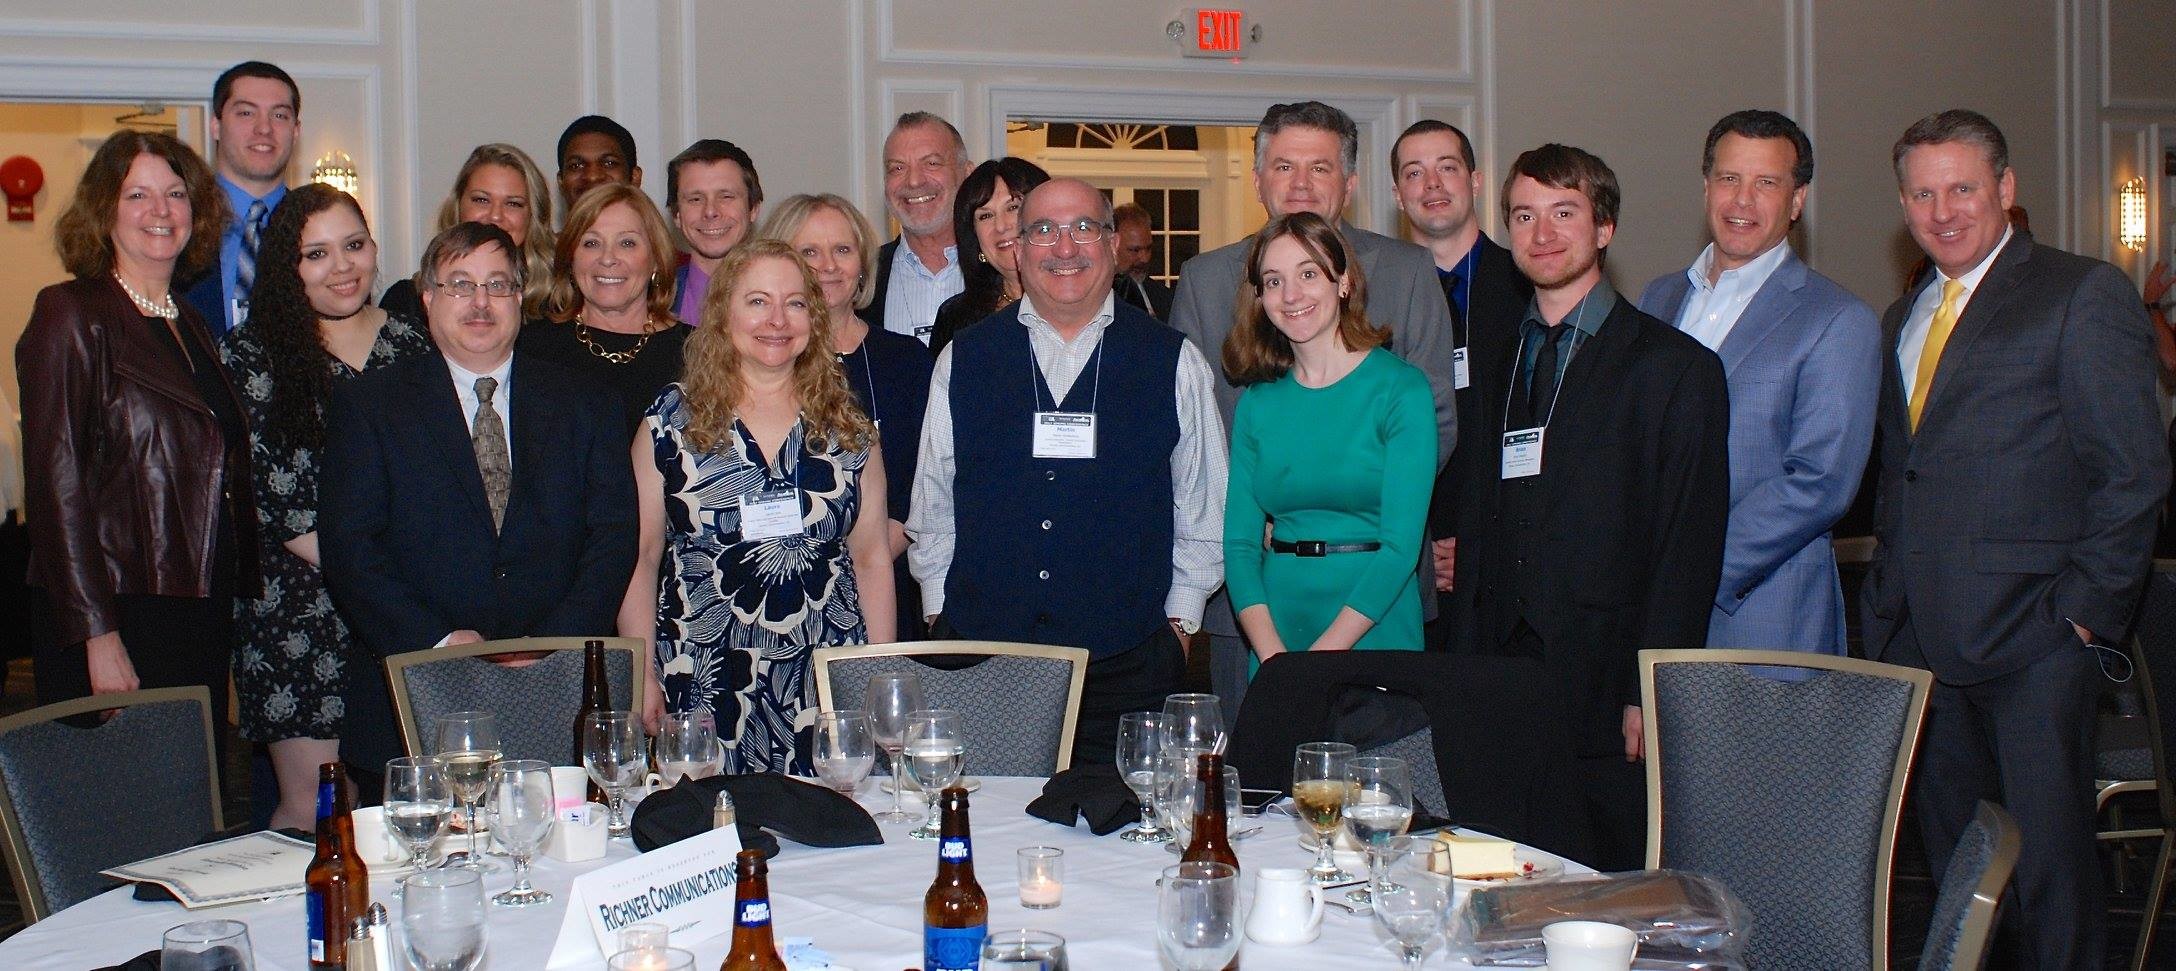 The Herald Community Newspapers crew at the New York Press Association convention in Saratoga Springs, N.Y., last weekend.